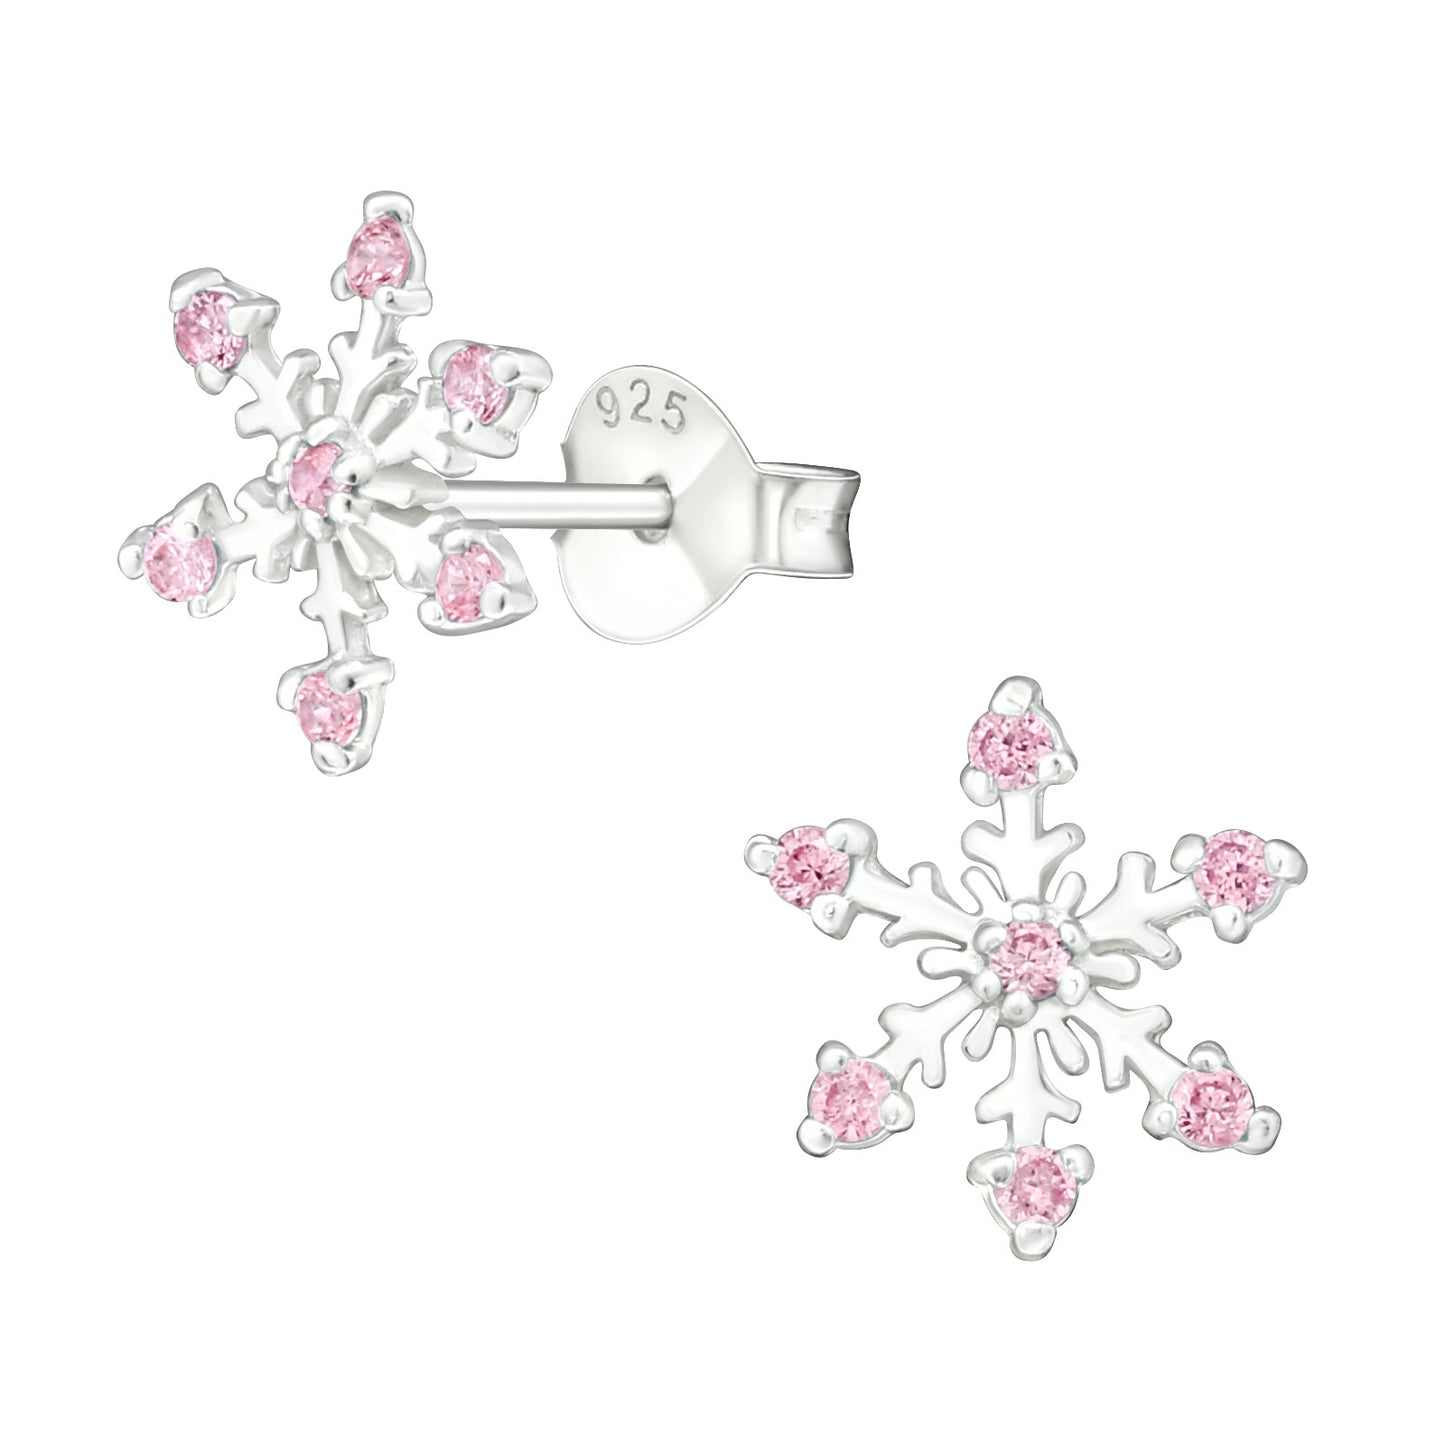 Snow Flake Winter Sterling Silver Earrings with Sparkling Cubic Zirconia Crystals